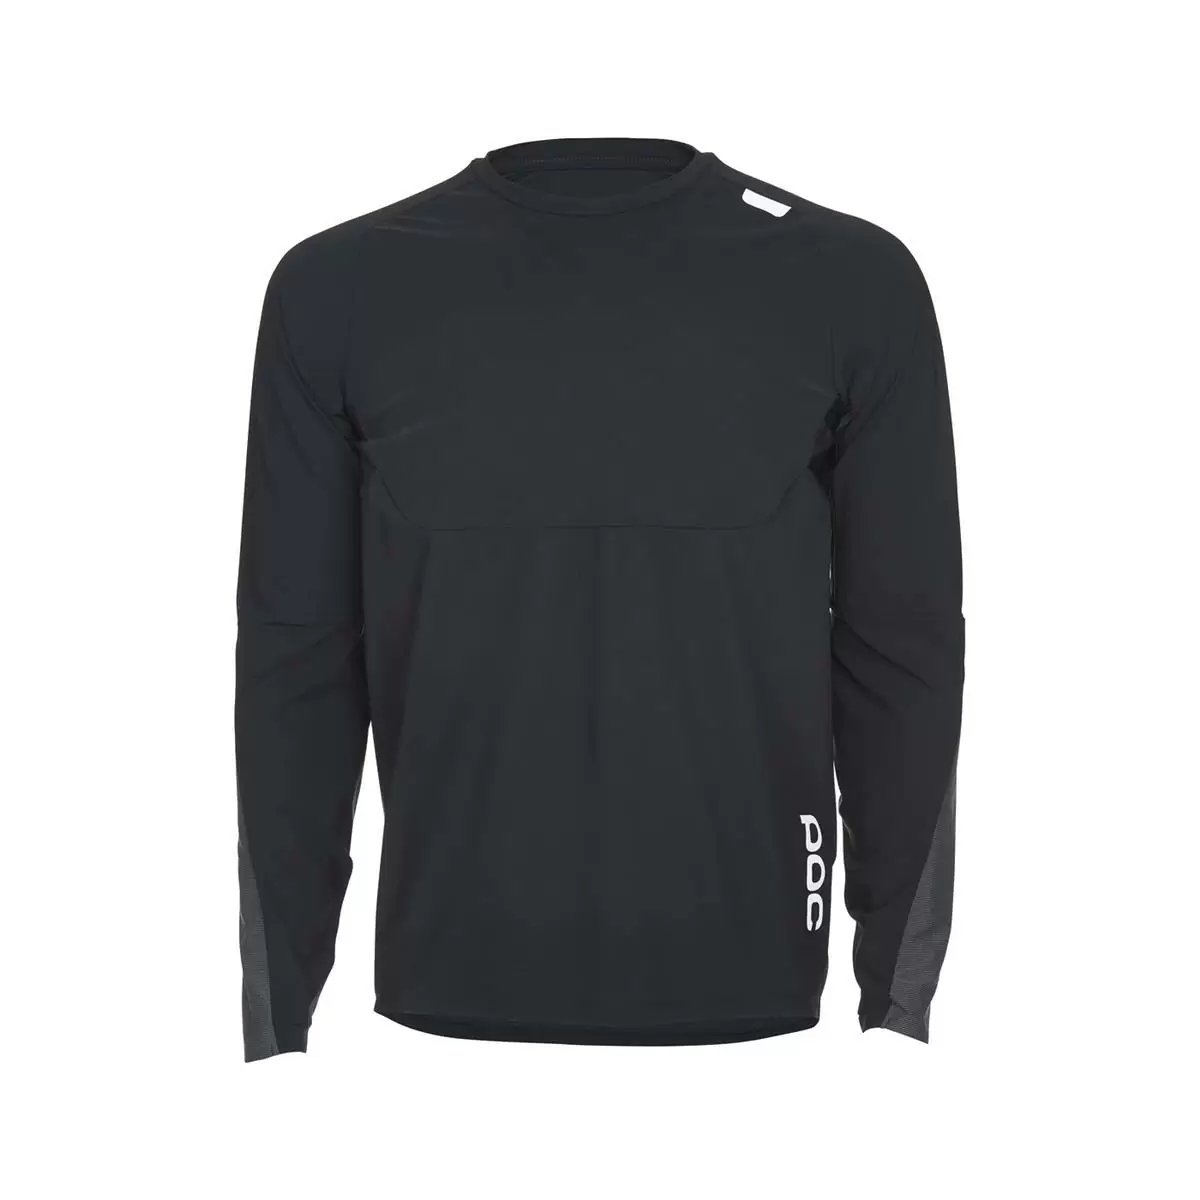 Resistance DH Long-Sleeve Jersey Black Size XXL - image